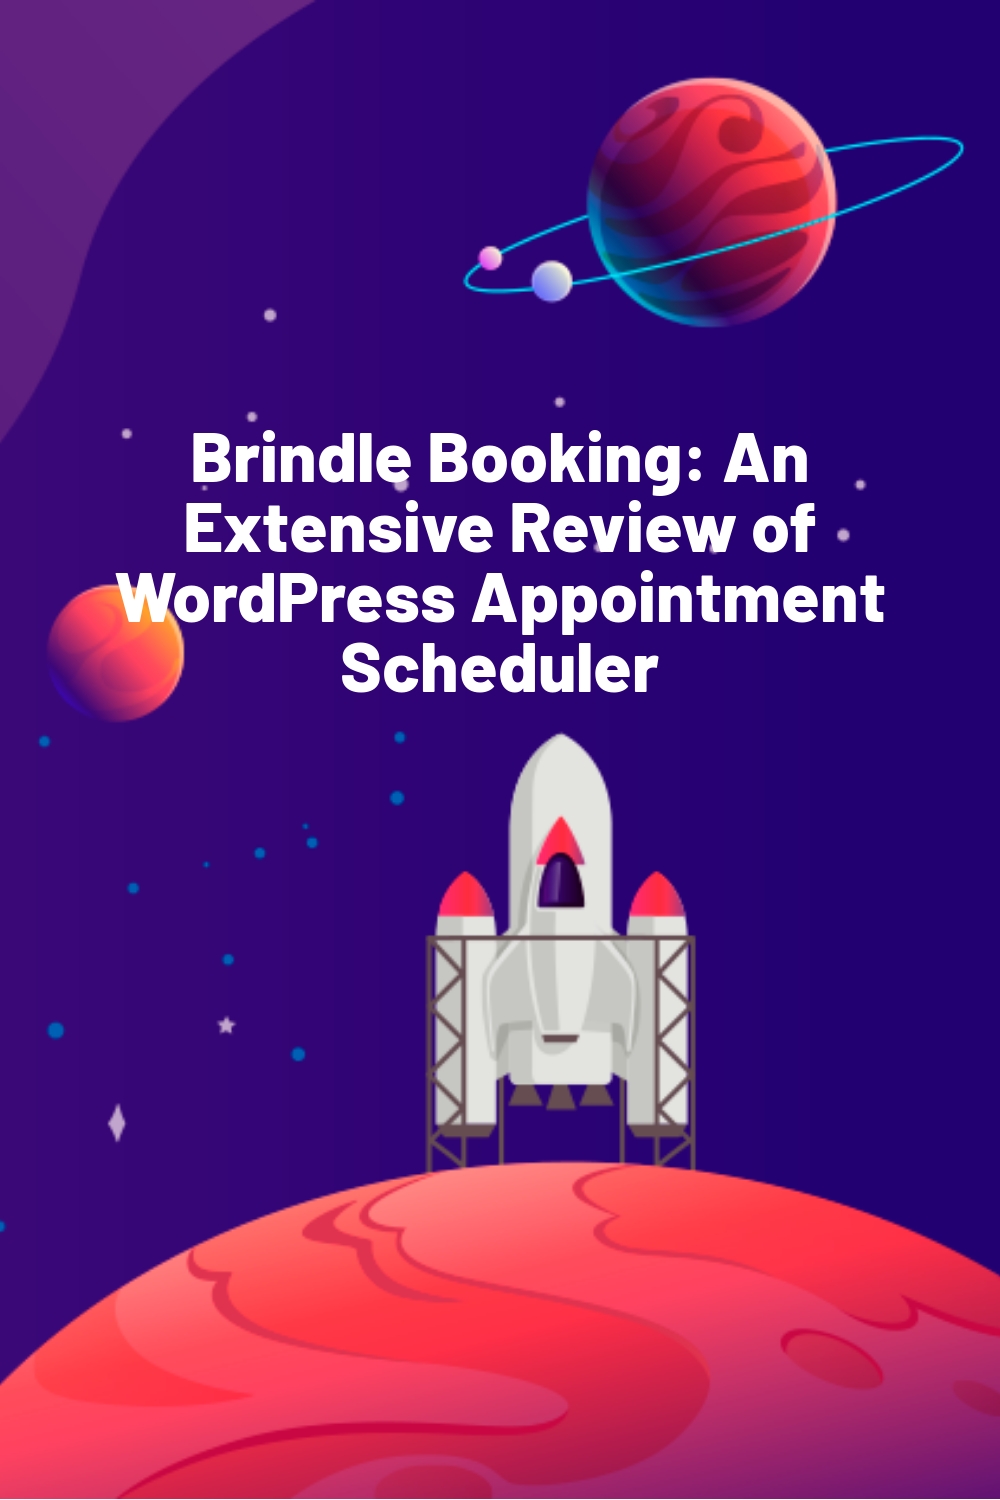 Brindle Booking: An Extensive Review of WordPress Appointment Scheduler